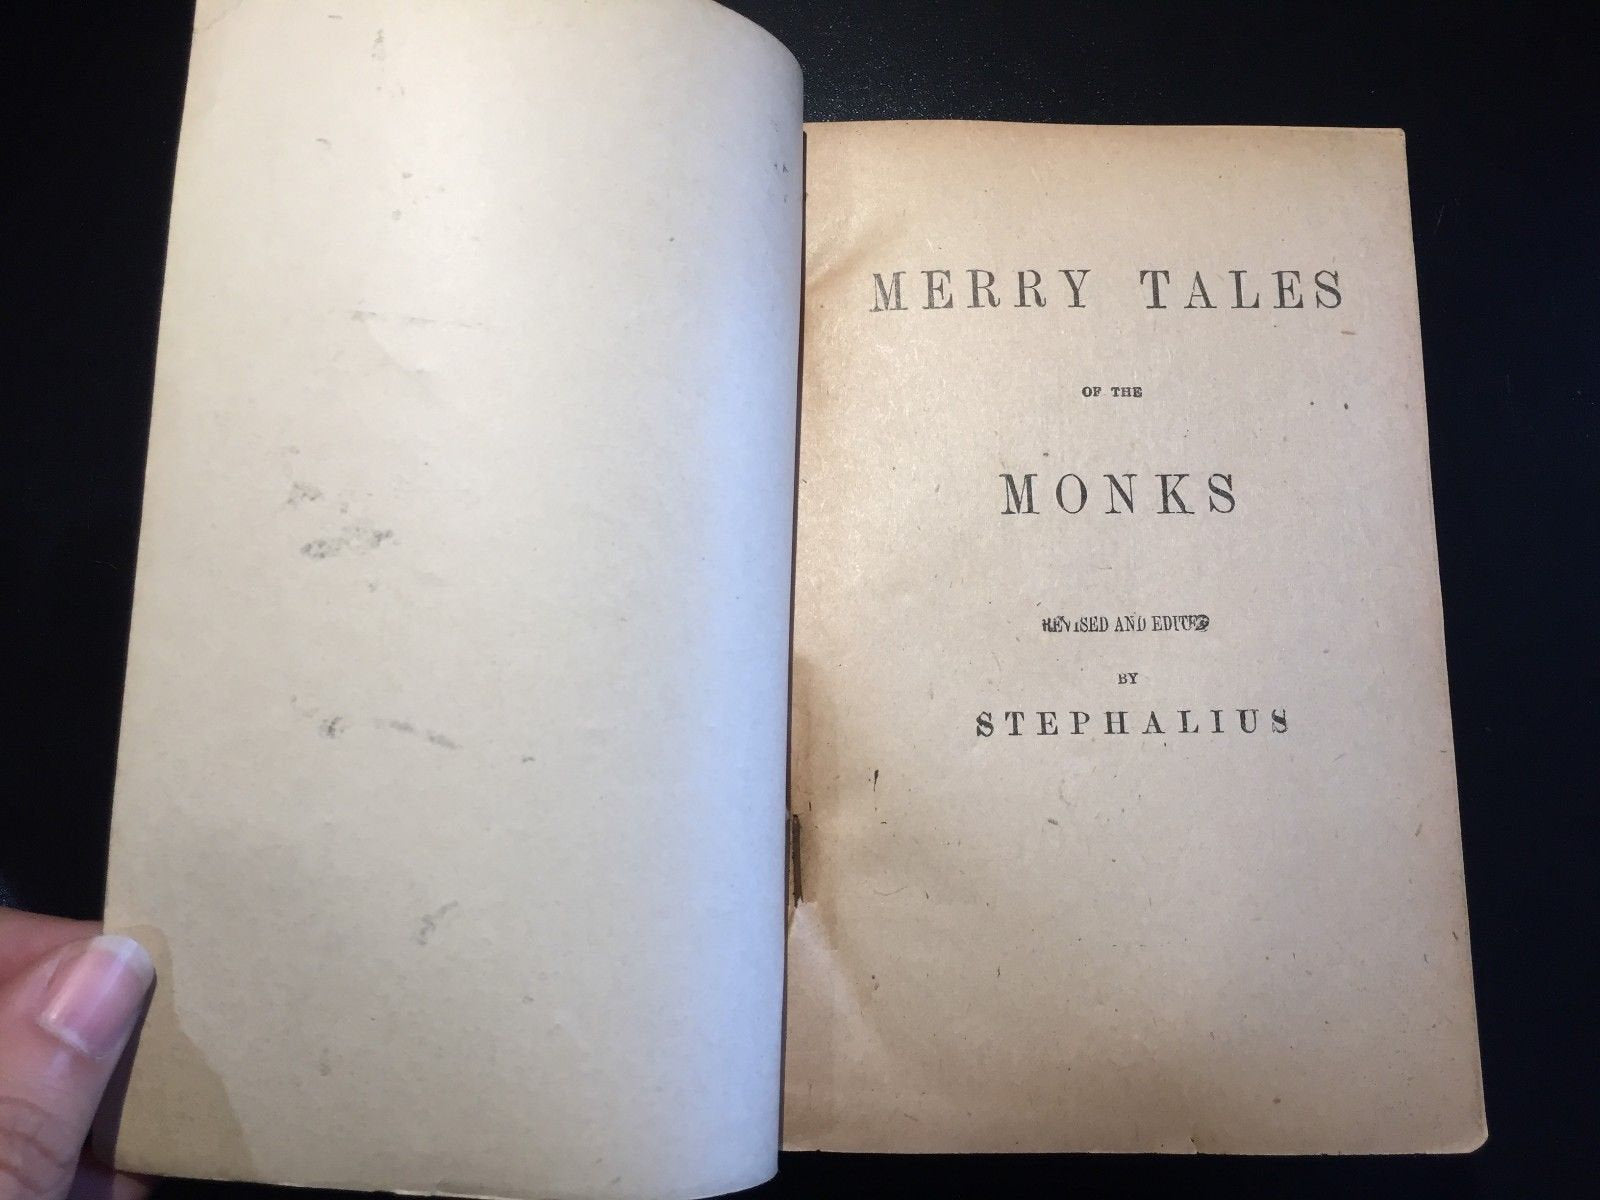 Merry Tales of the Monks, Stephalius, 1891, Paperback, Rare